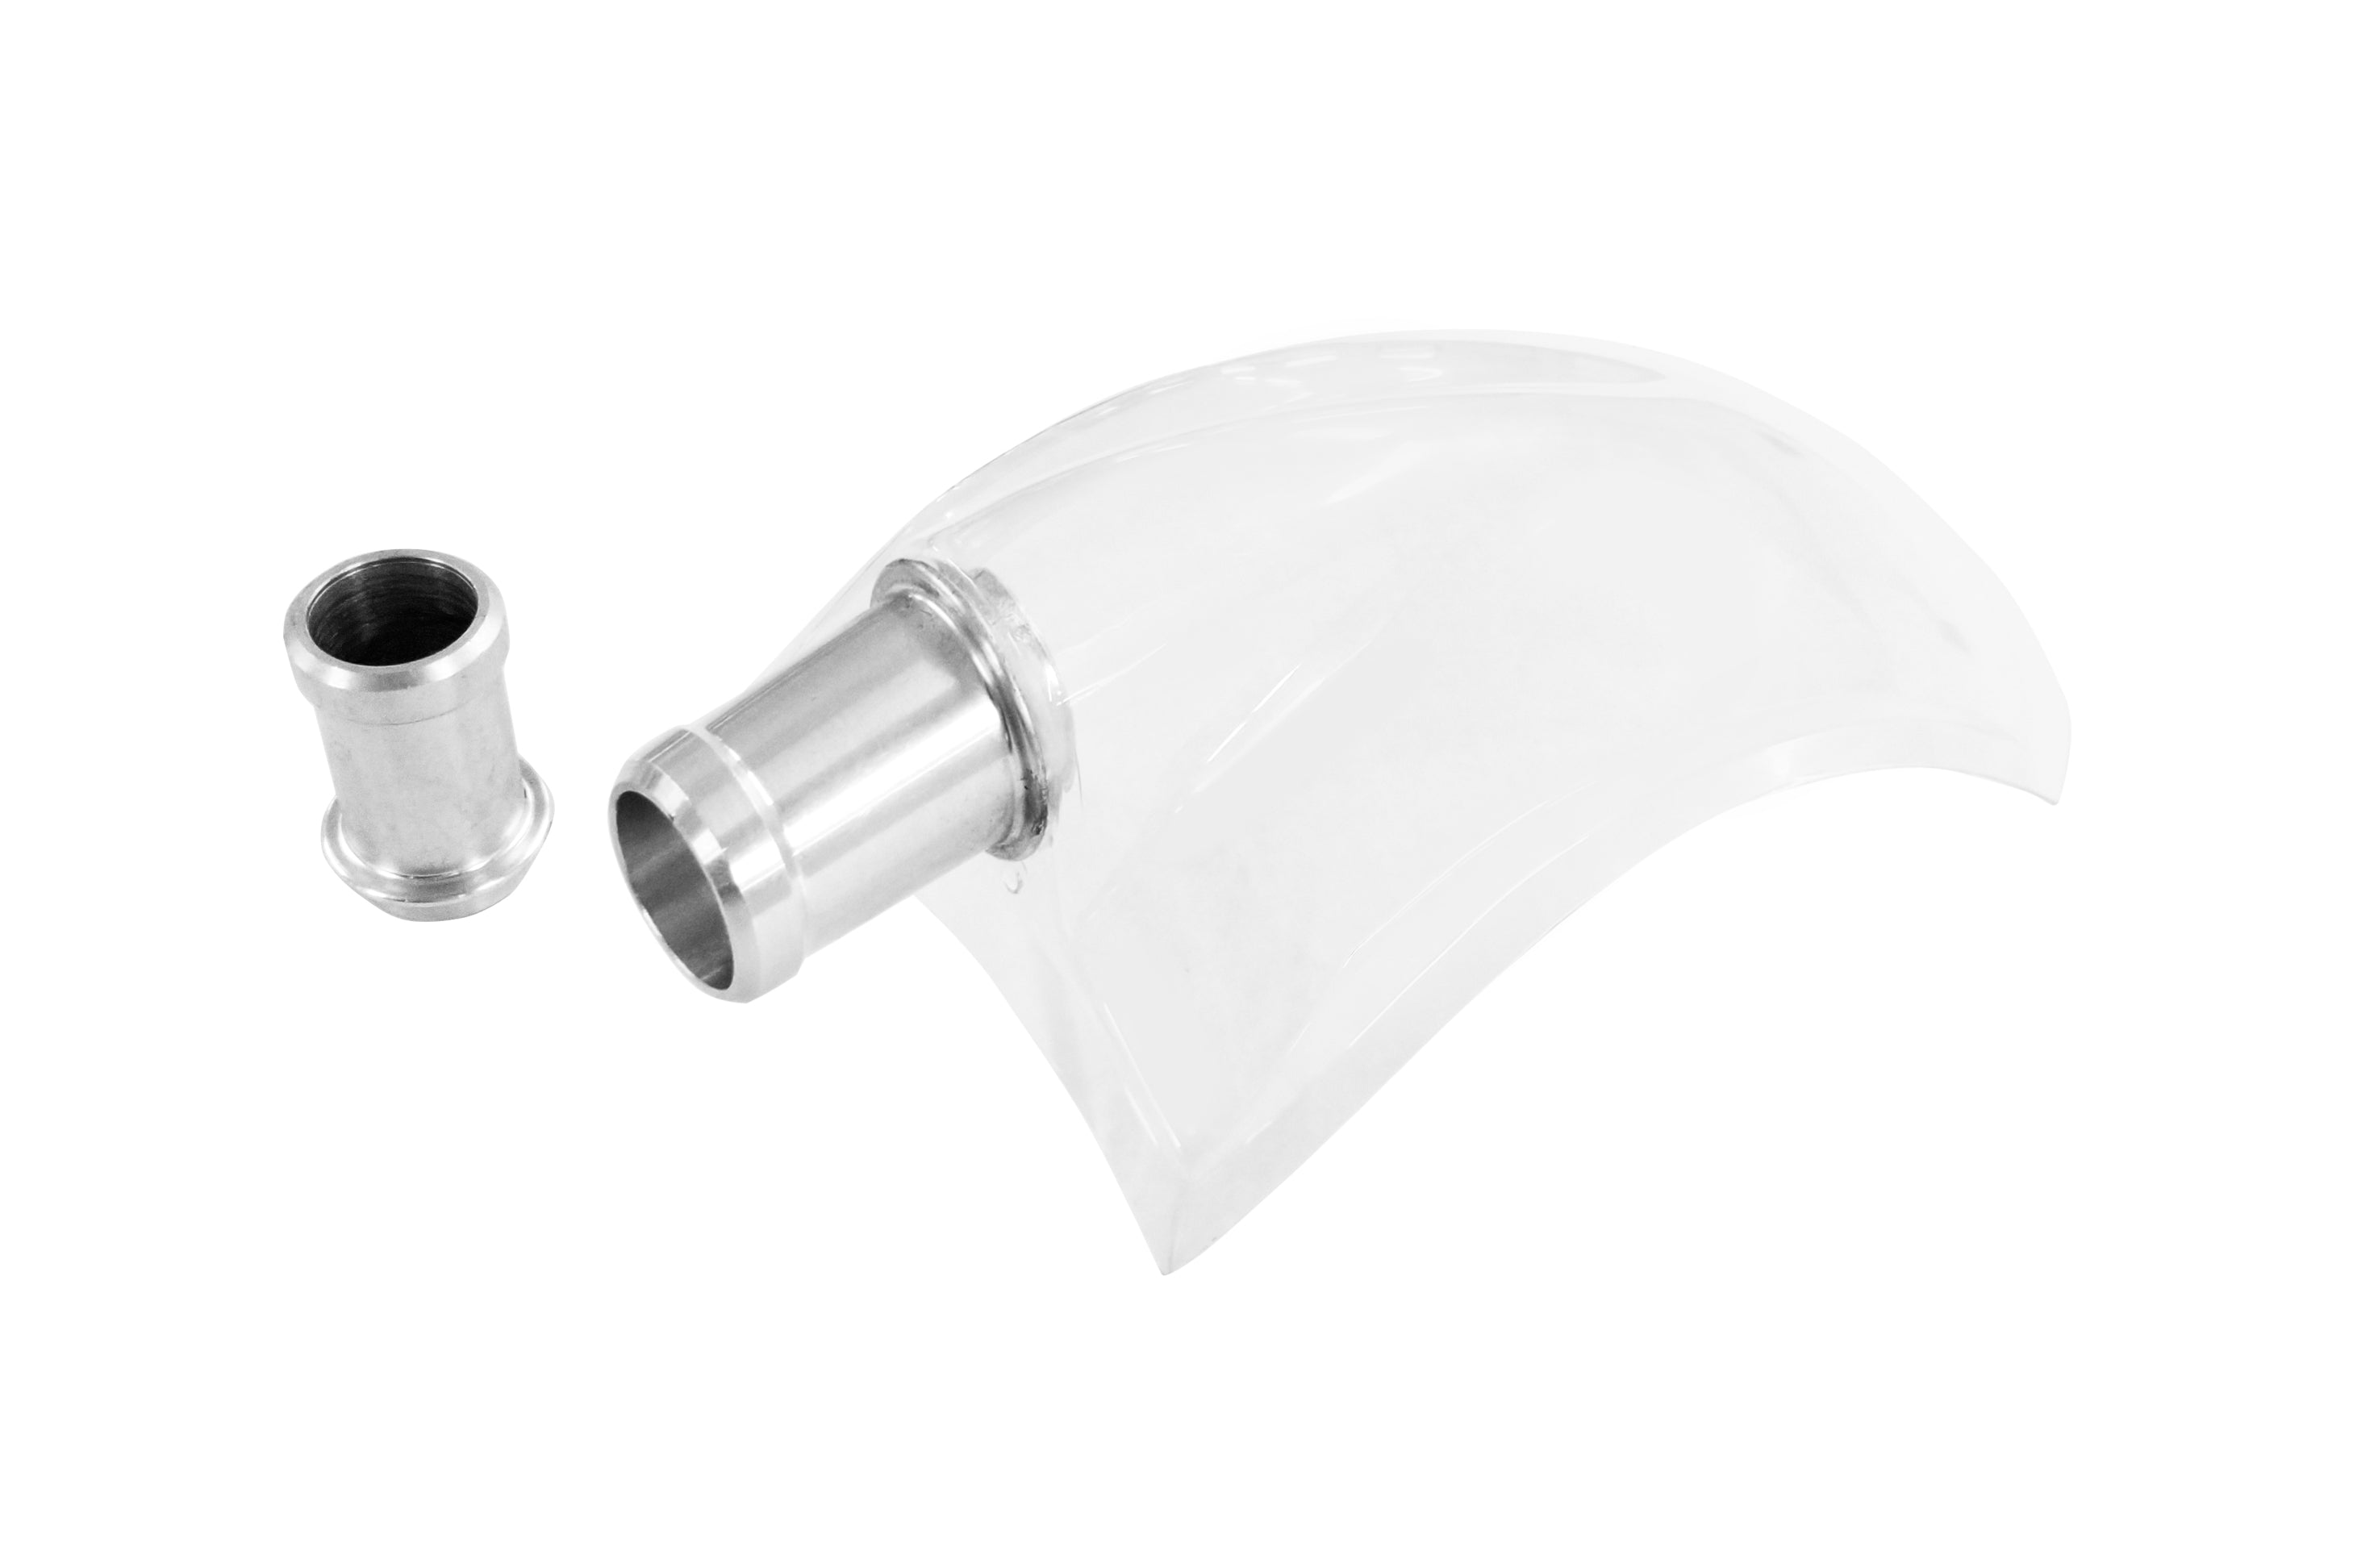 SCHUBERTH 1010008098 Flat Forced air scoop clear - Large Connector Prep. with tape SP1 Photo-1 